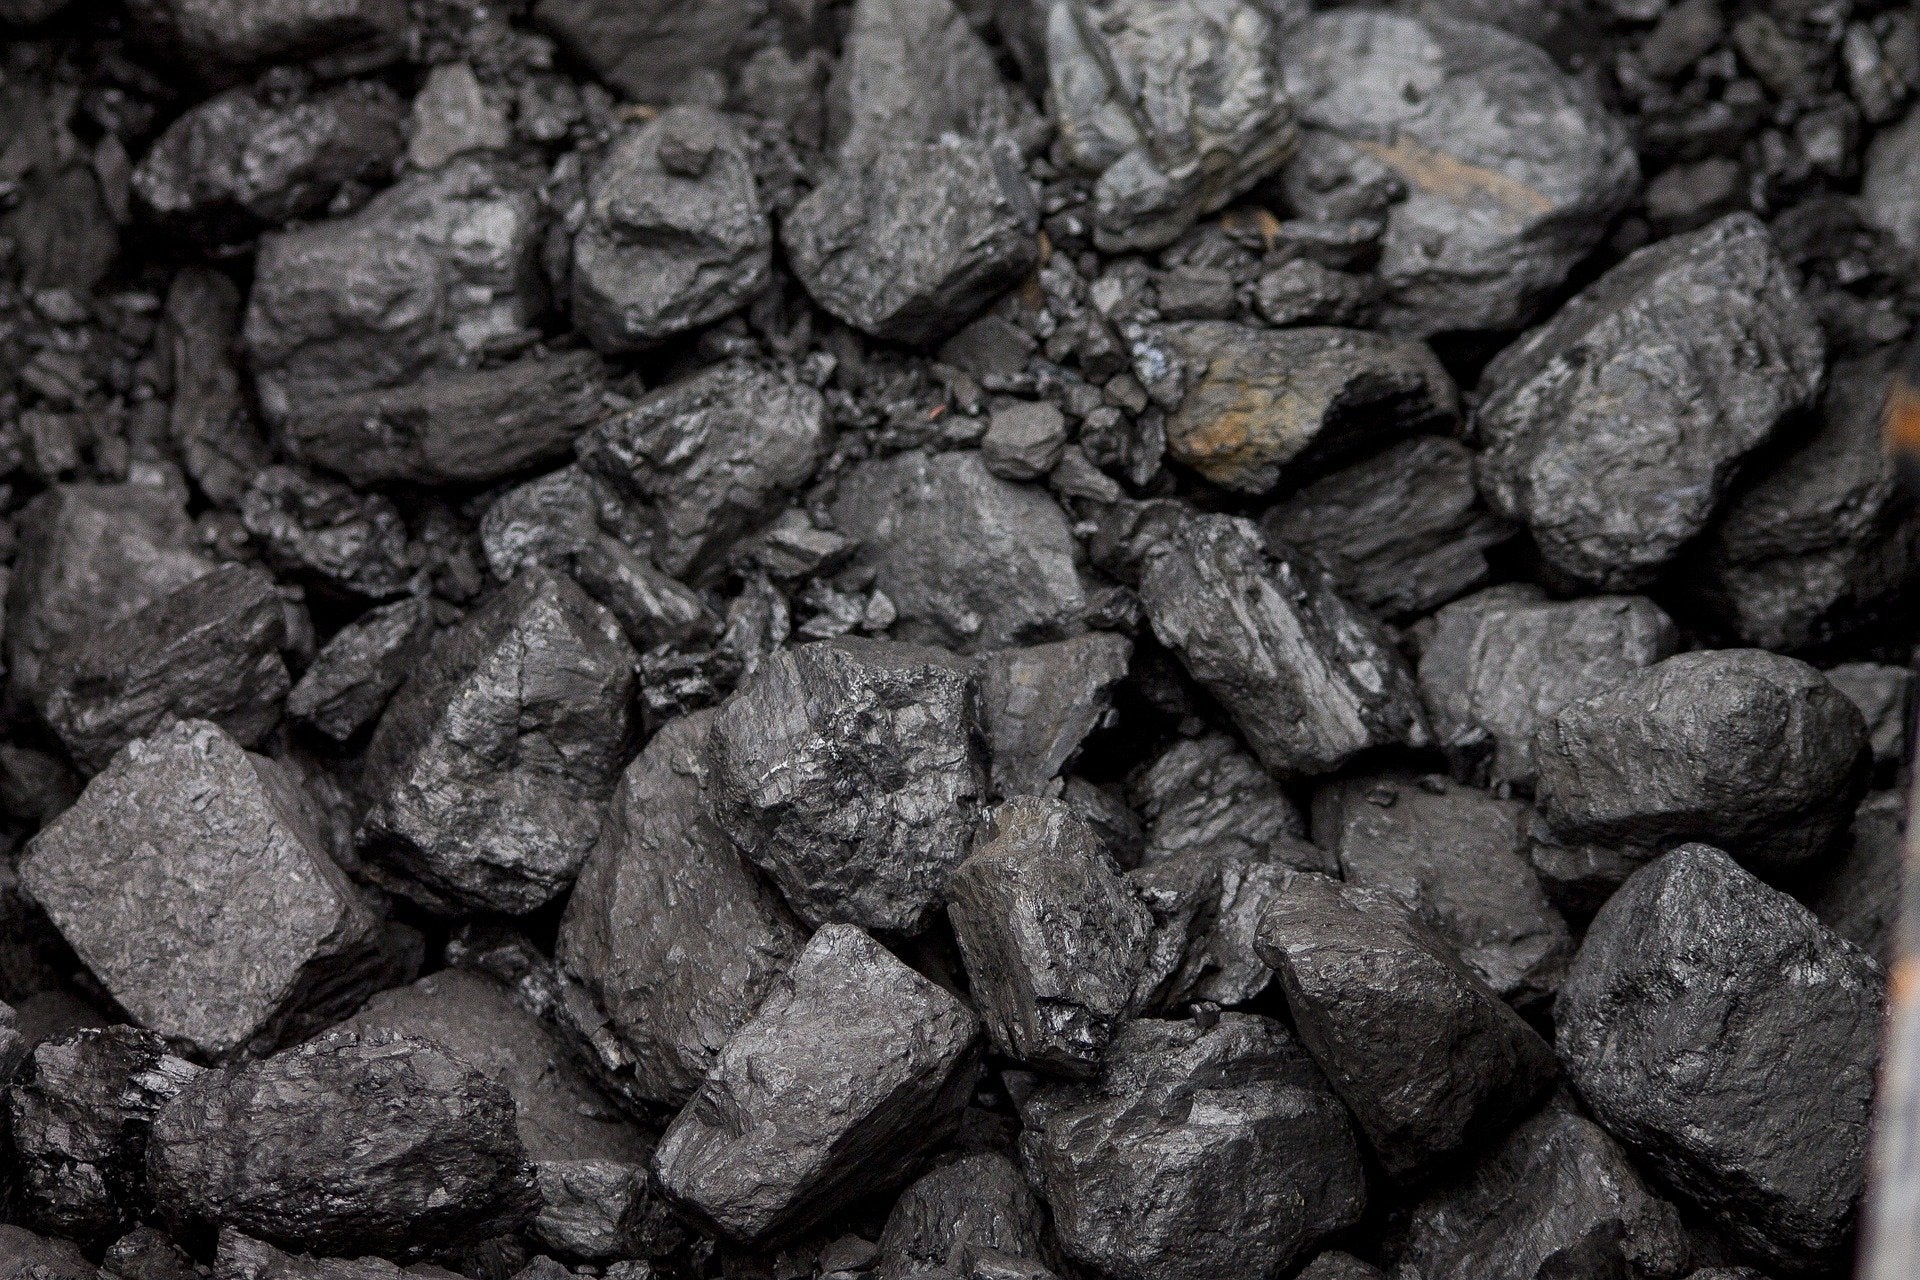 Greece plans more coal production to reduce dependence on Russia